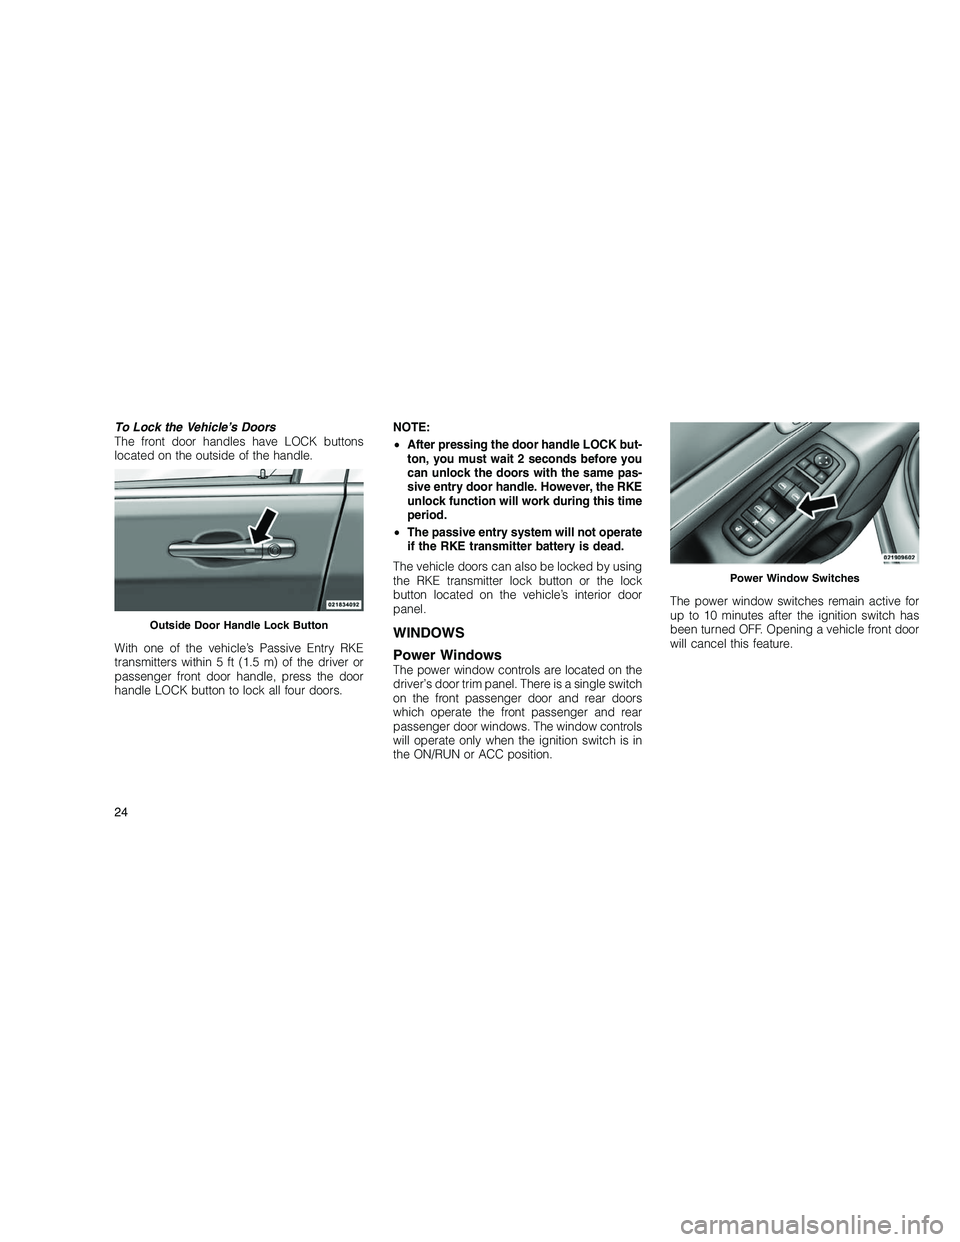 JEEP GRAND CHEROKEE 2010  Owner handbook (in English) 
To Lock the Vehicle’s Doors
The front door handles have LOCK buttons
located on the outside of the handle.
With one of the vehicle’s Passive Entry RKE
transmitters within 5 ft (1.5 m) of the driv